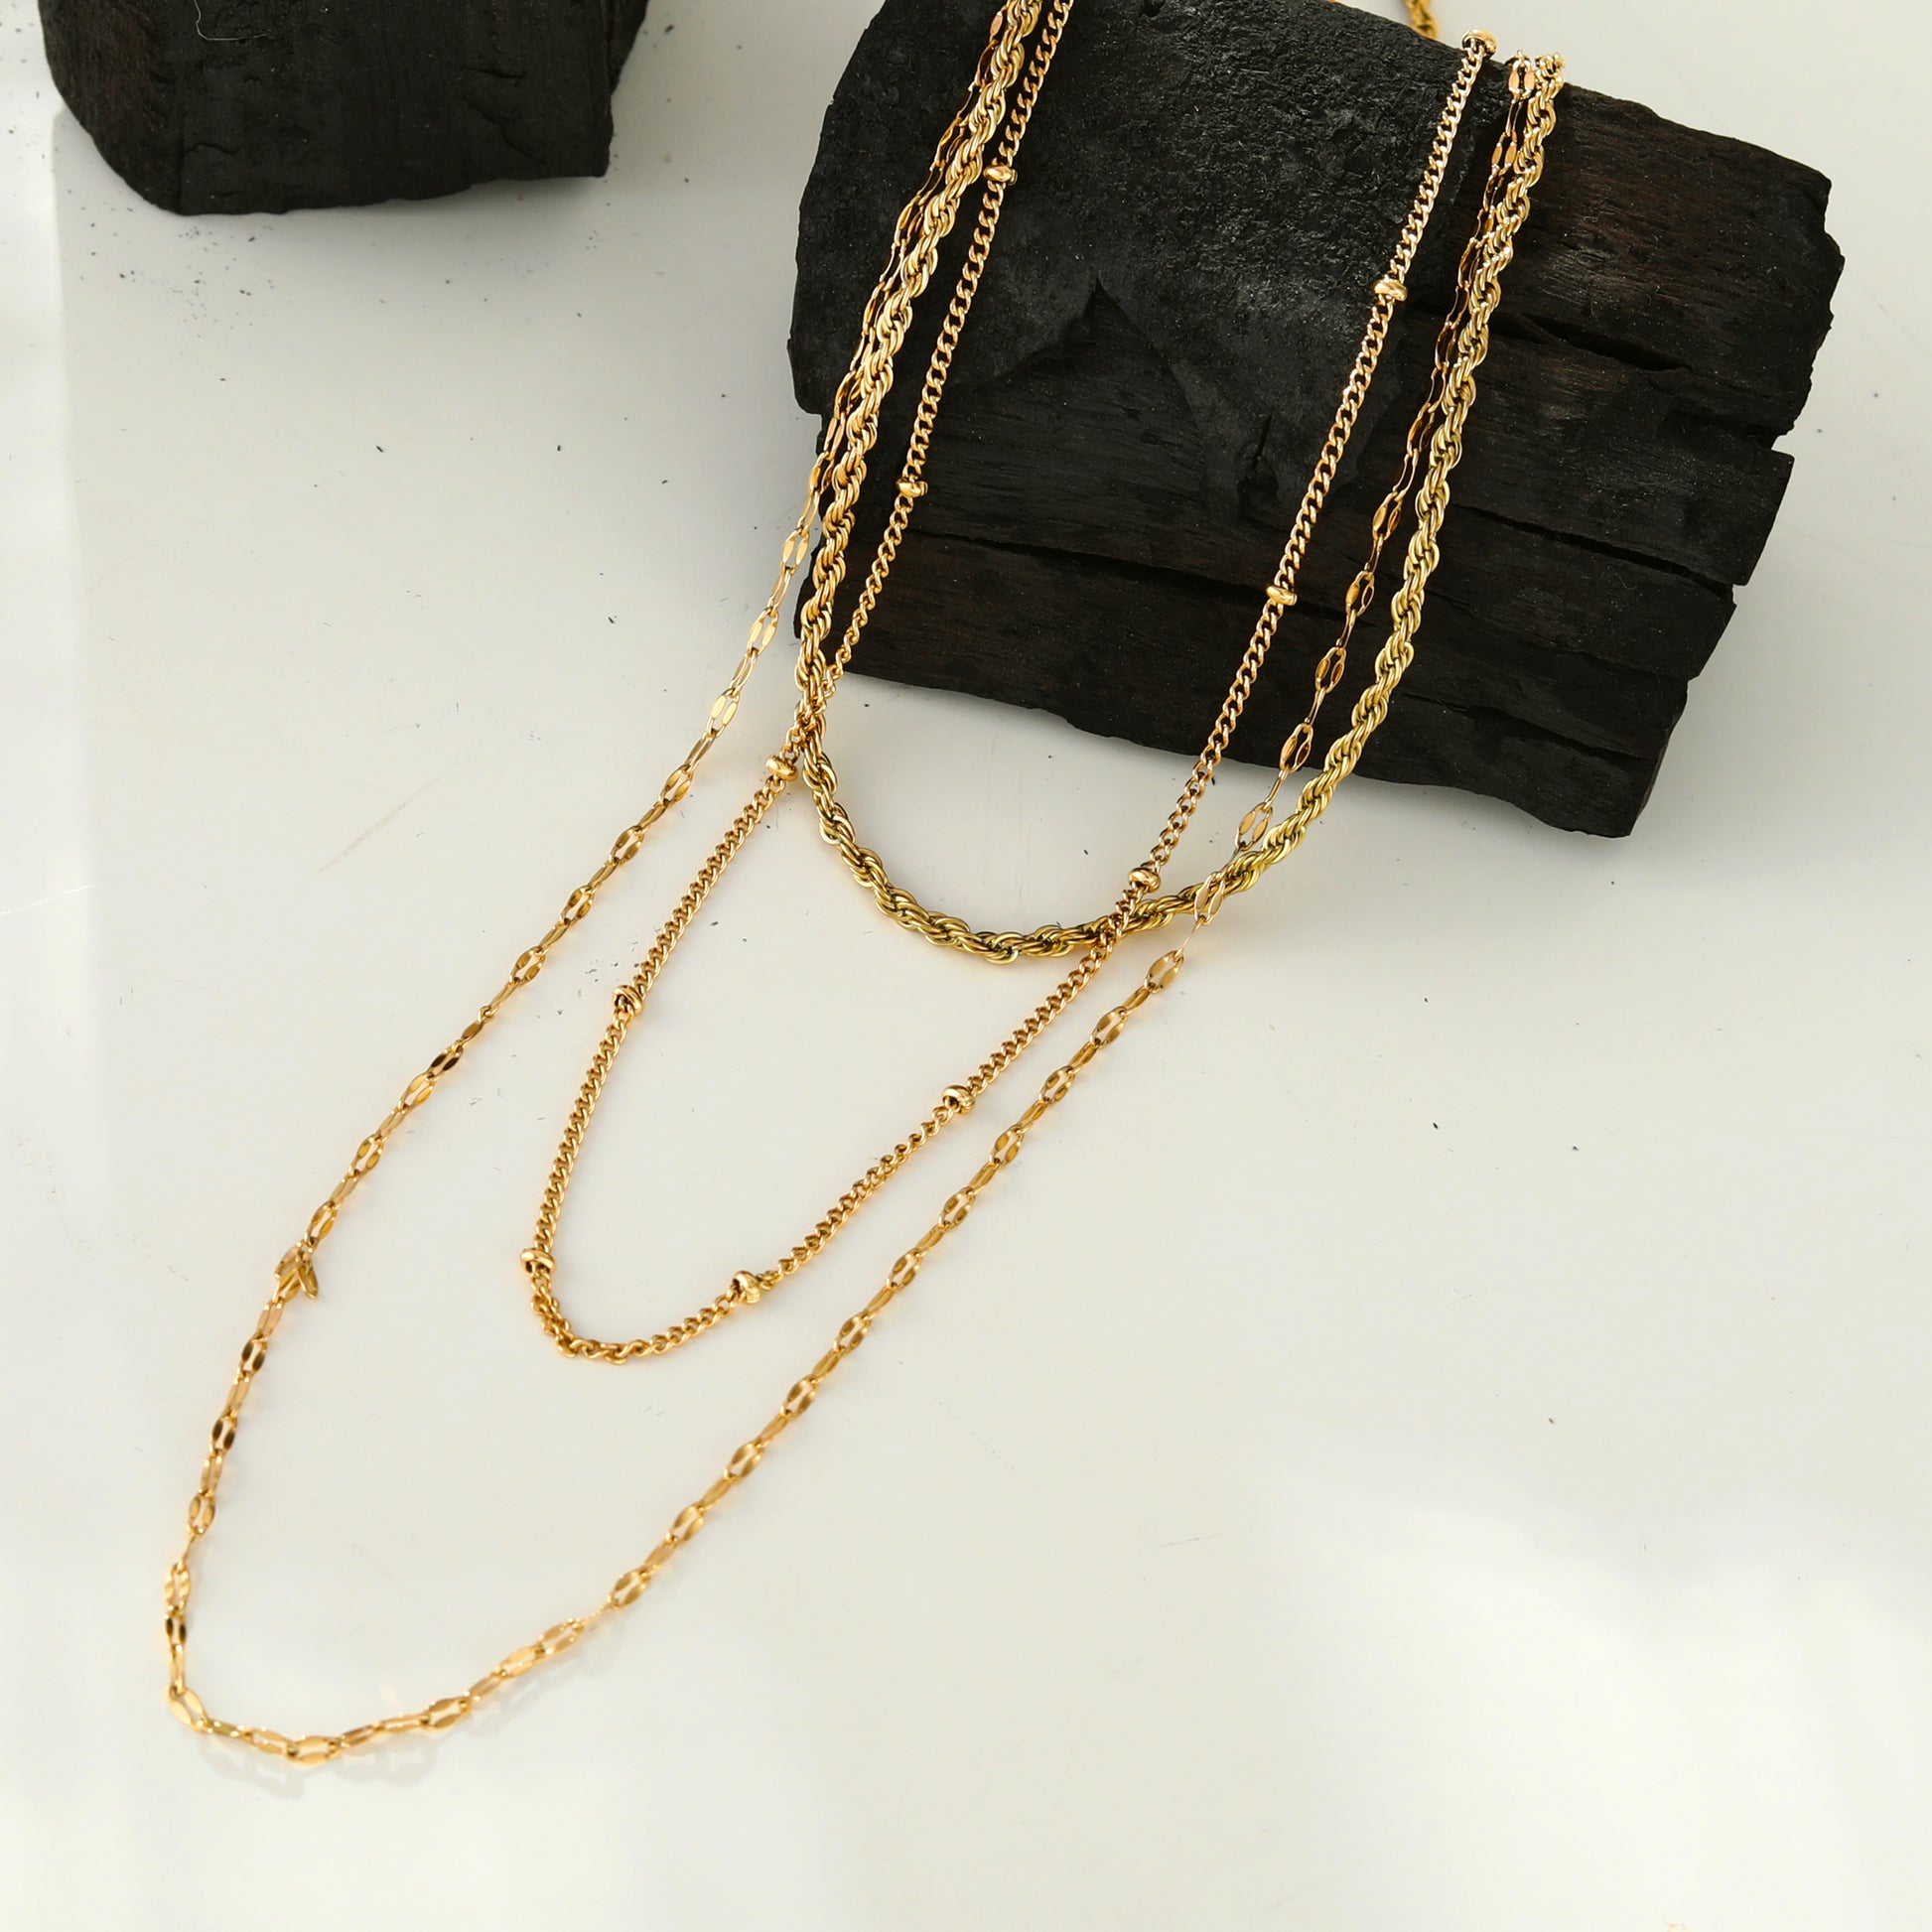 hackney-nine | hackneynine | necklace | layered-necklace | layered-chain-necklace | jewellery | jewellery-store | shop-jewelry | gold-jewellery | silver-jewellery | dressy_jewellery | classy_ jewellery | on_trend_jewellery | fashion_ jewellery | cool_jewellery | affordable_jewellery | designer_jewellery | vintage_jeweler | gifts-for-her | gifts-for-mum | gifts-for-girls | gifts-for-females